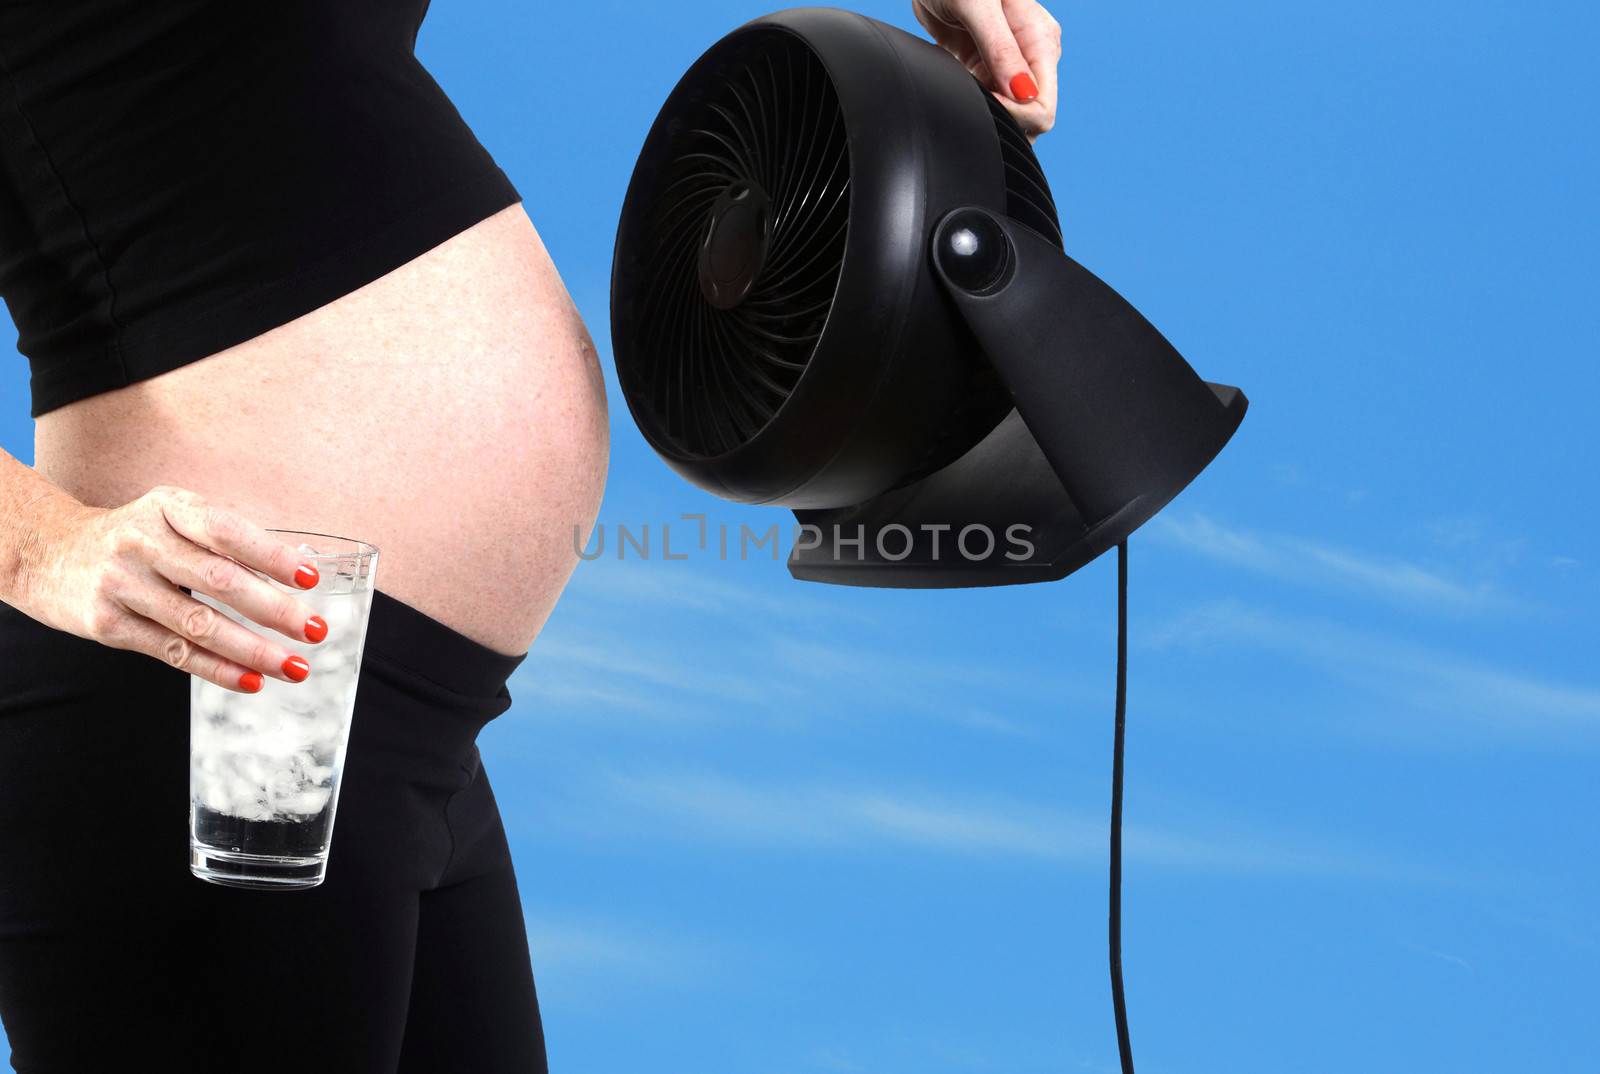 pregnancy hormones and hot flash by ftlaudgirl